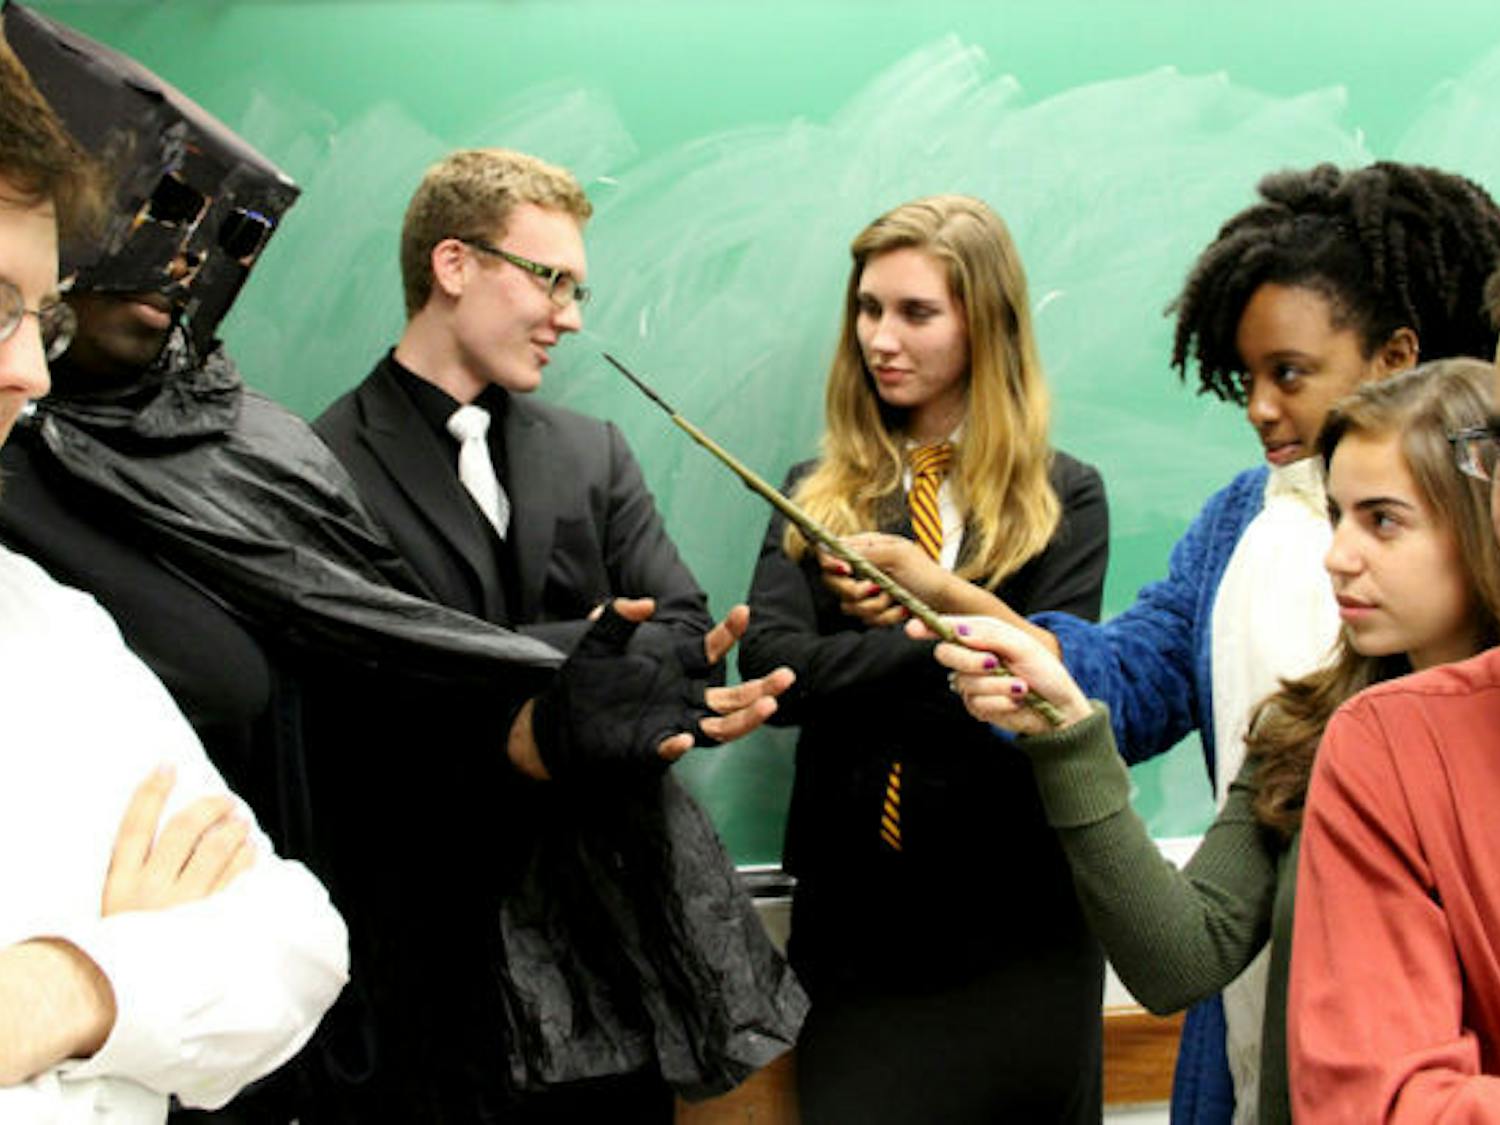 UF Speech and Debate society’s intramural team conducted a Harry Potter versus Luke Skywalker debate to raise money for the Food for Kids Backpack Program. The two sides debated for 90 minutes about who would win in a fantasy duel between Skywalker and Potter. Harry Potter, Harris Kraus, won the debate, garnering all but seven votes.